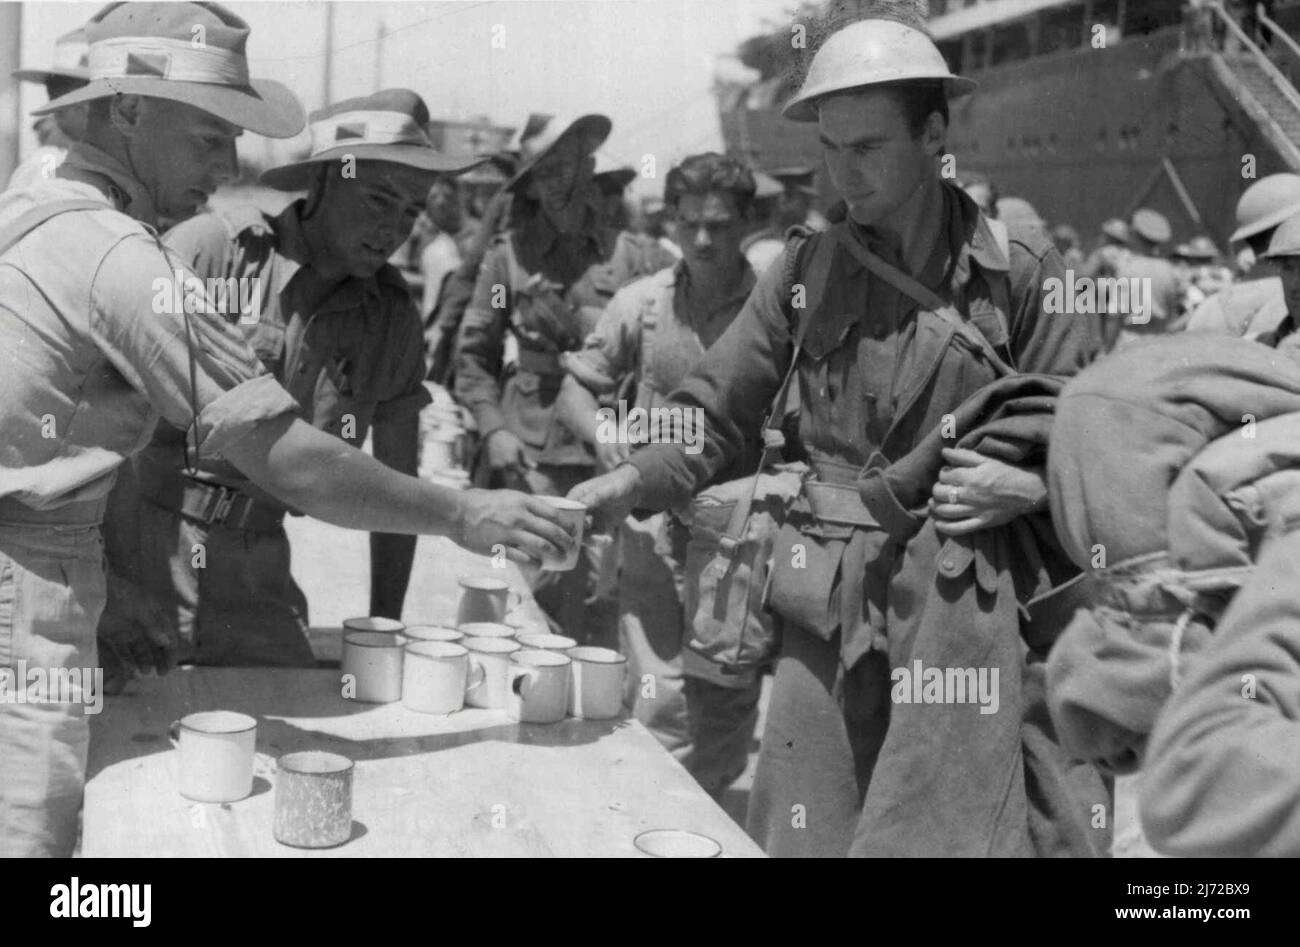 Tea and rations were ready for the Australians when they disembarked